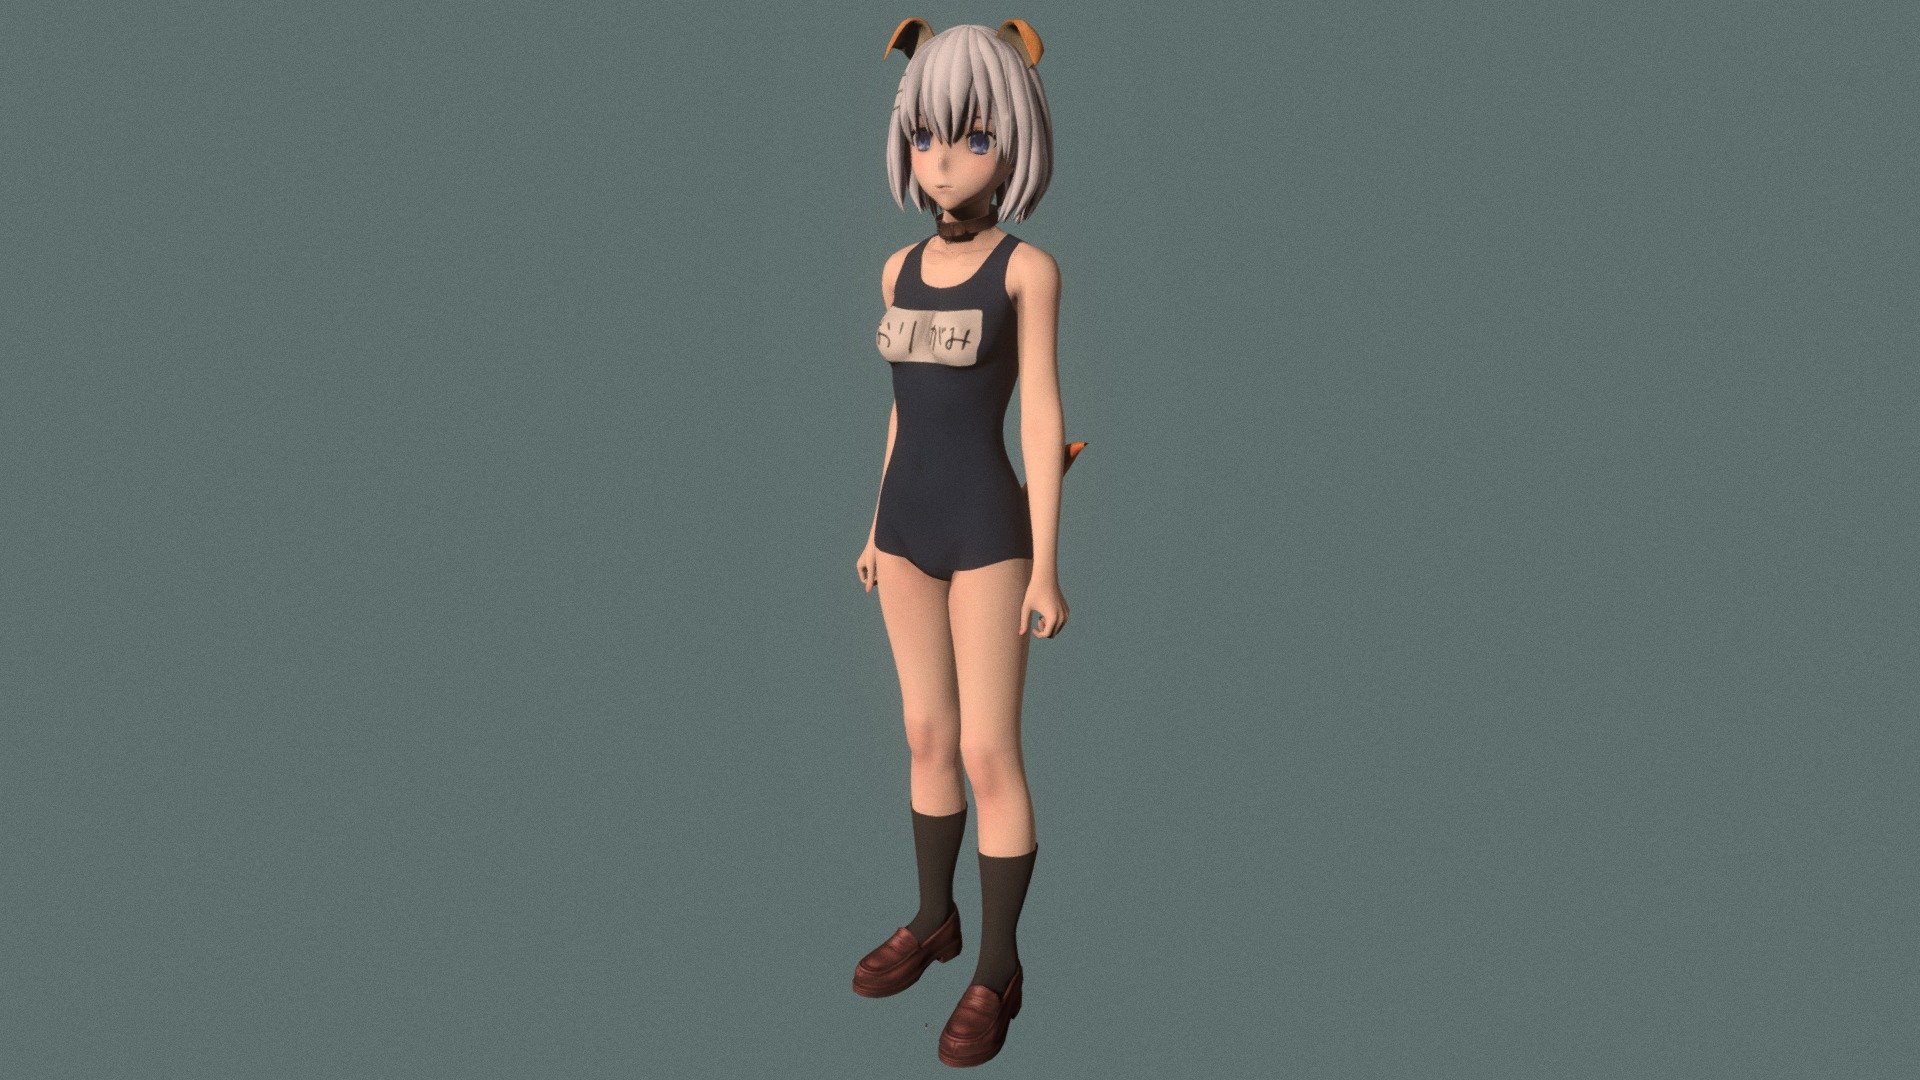 Posed model of anime girl Origami Tobiichi (Date A Live).

This product include .FBX (ver. 7200) and .MAX (ver. 2010) files.

Rigged version: https://sketchfab.com/3d-models/t-pose-rigged-model-of-origami-tobiichi-f0e9c9e53526415395fb6460b9cbc643

I support convert this 3D model to various file formats: 3DS; AI; ASE; DAE; DWF; DWG; DXF; FLT; HTR; IGS; M3G; MQO; OBJ; SAT; STL; W3D; WRL; X.

You can buy all of my models in one pack to save cost: https://sketchfab.com/3d-models/all-of-my-anime-girls-c5a56156994e4193b9e8fa21a3b8360b

And I can make commission models.

If you have any questions, please leave a comment or contact me via my email 3d.eden.project@gmail.com 3d model